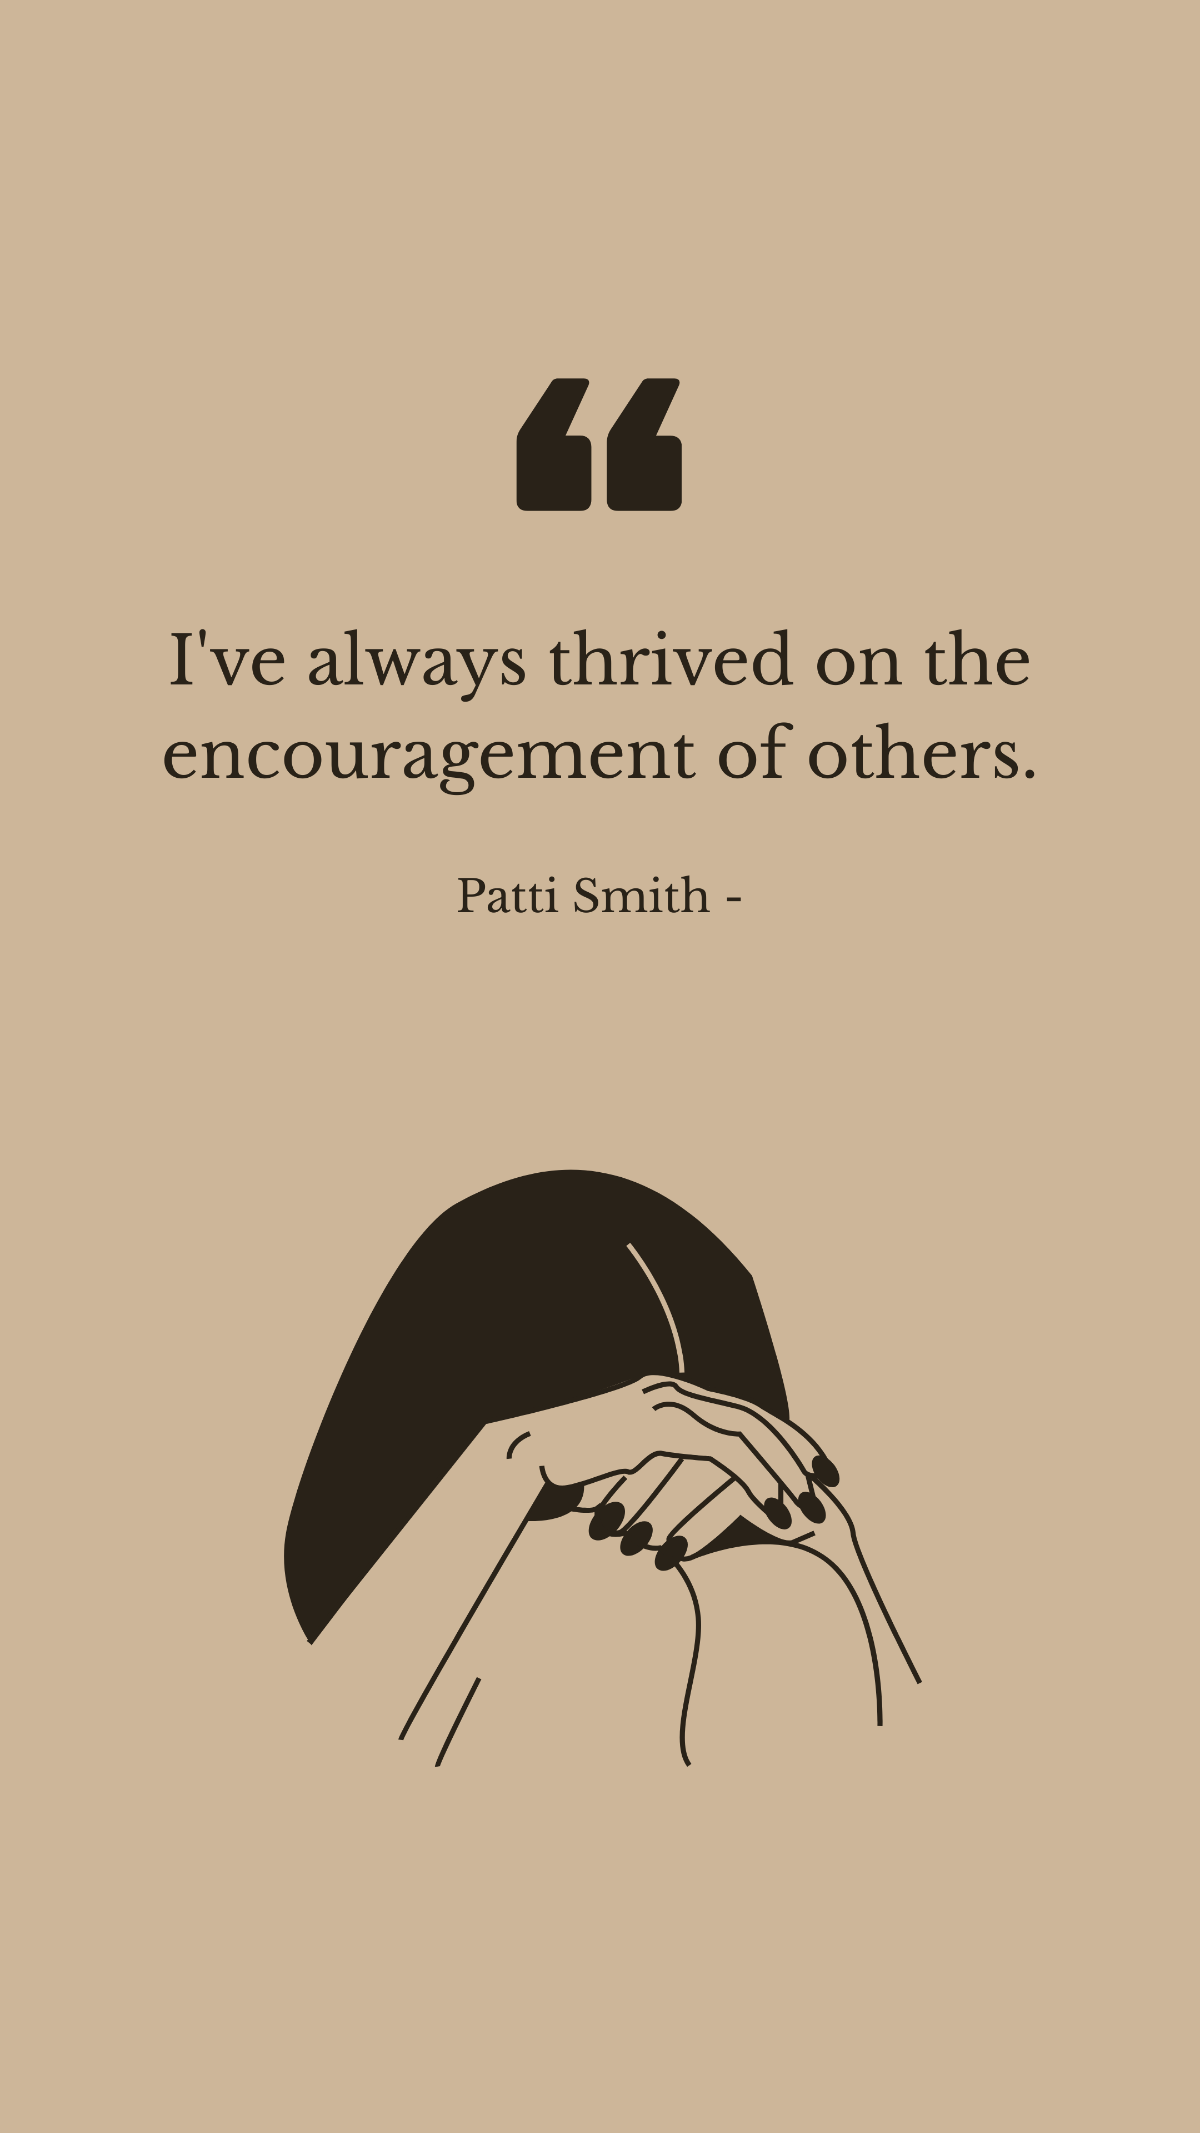 Patti Smith - I've always thrived on the encouragement of others.